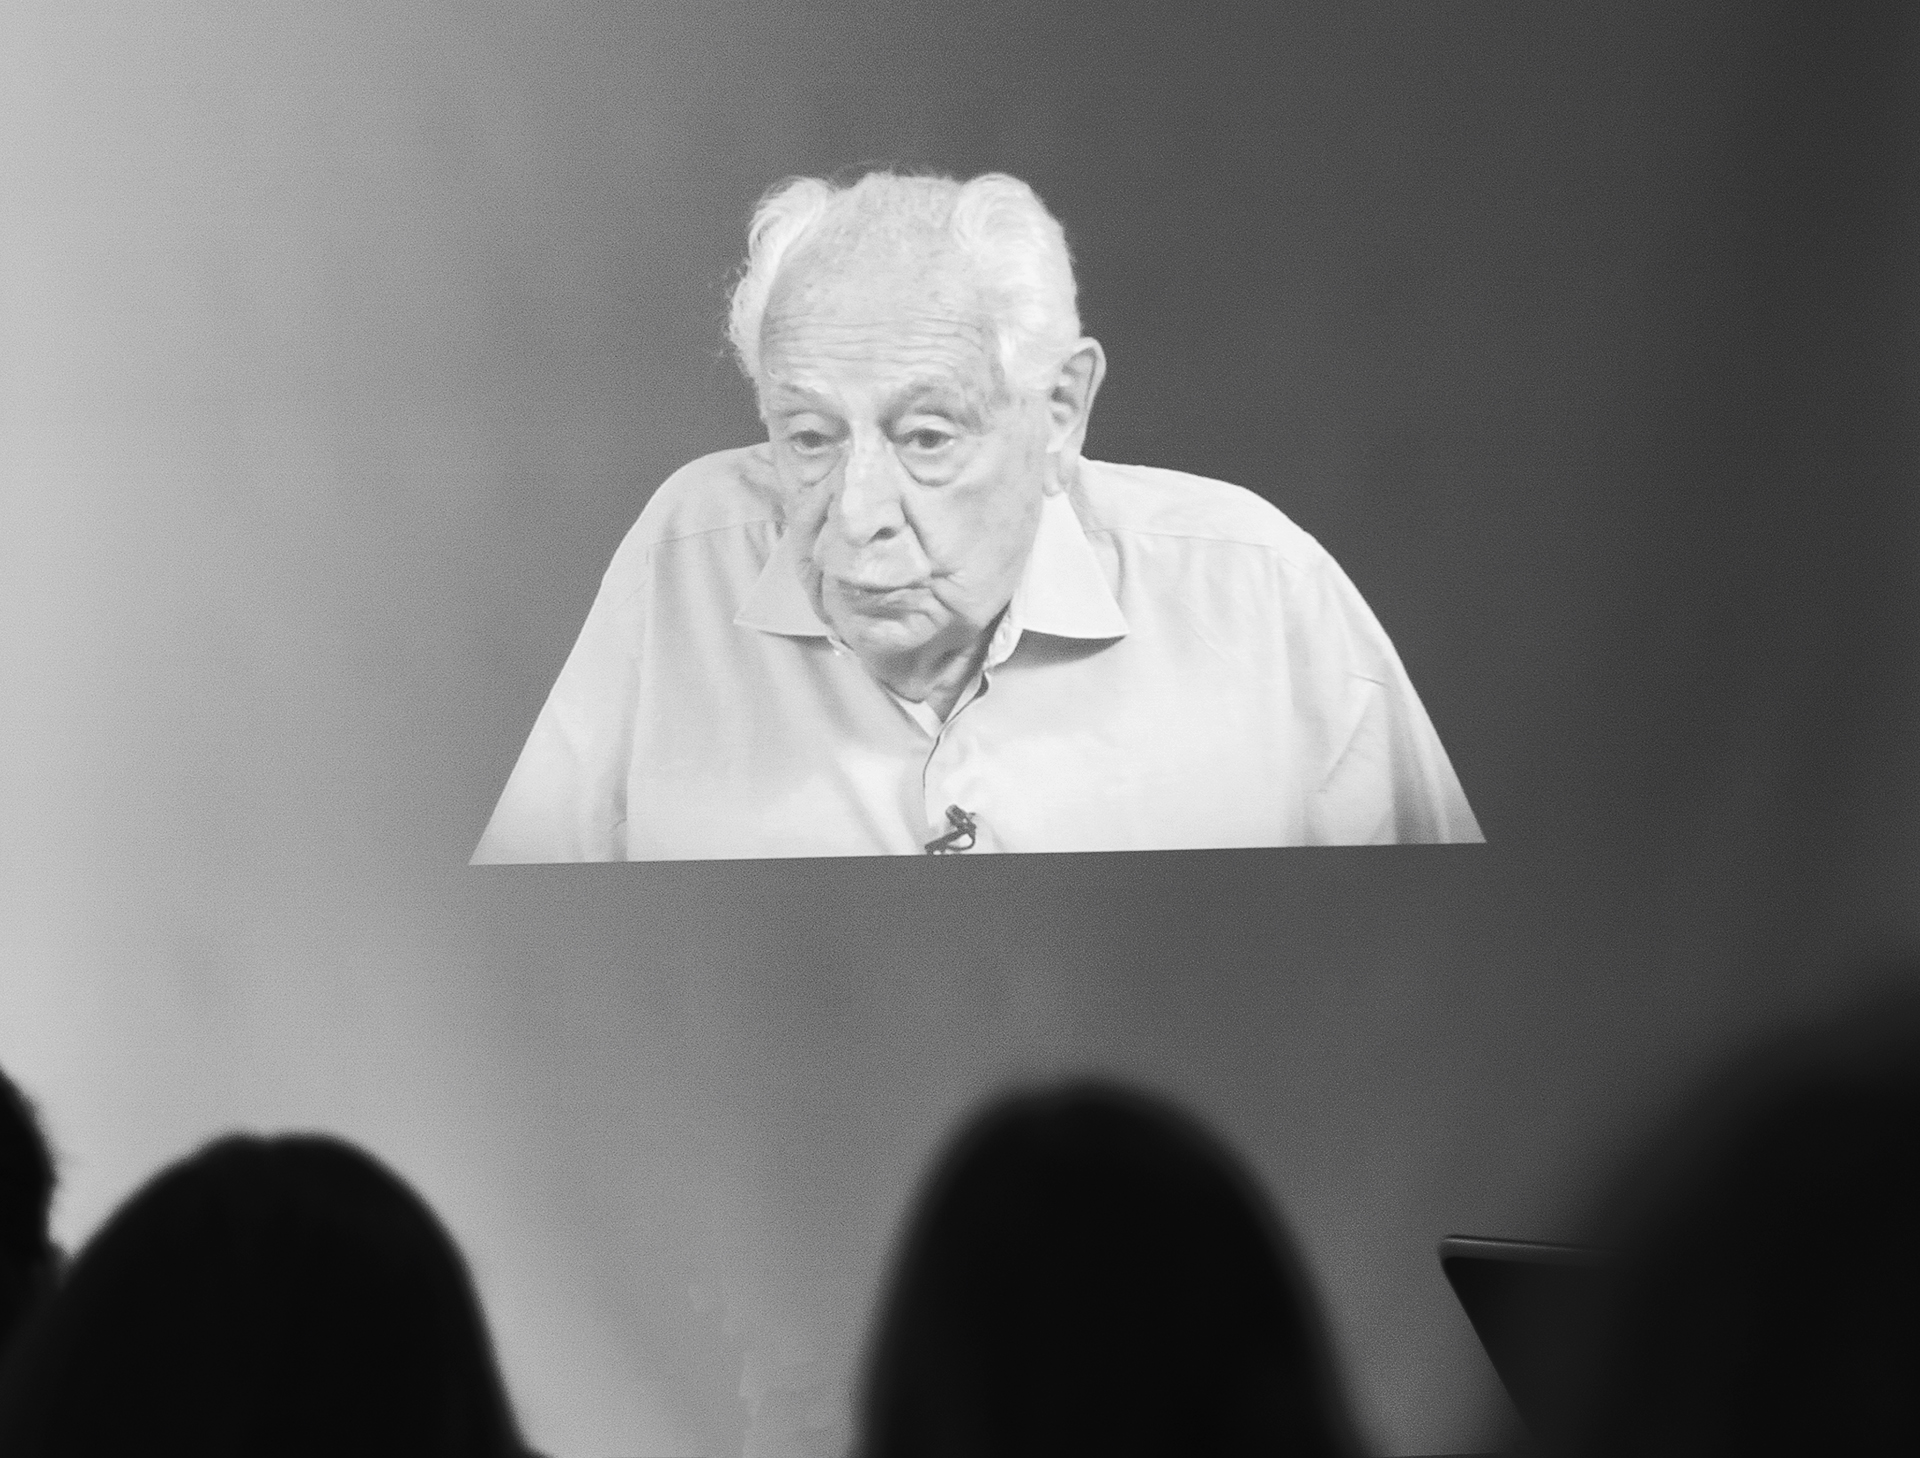 
Students learn about the history of the Holocaust by listening to the testimony of Walter Absil.